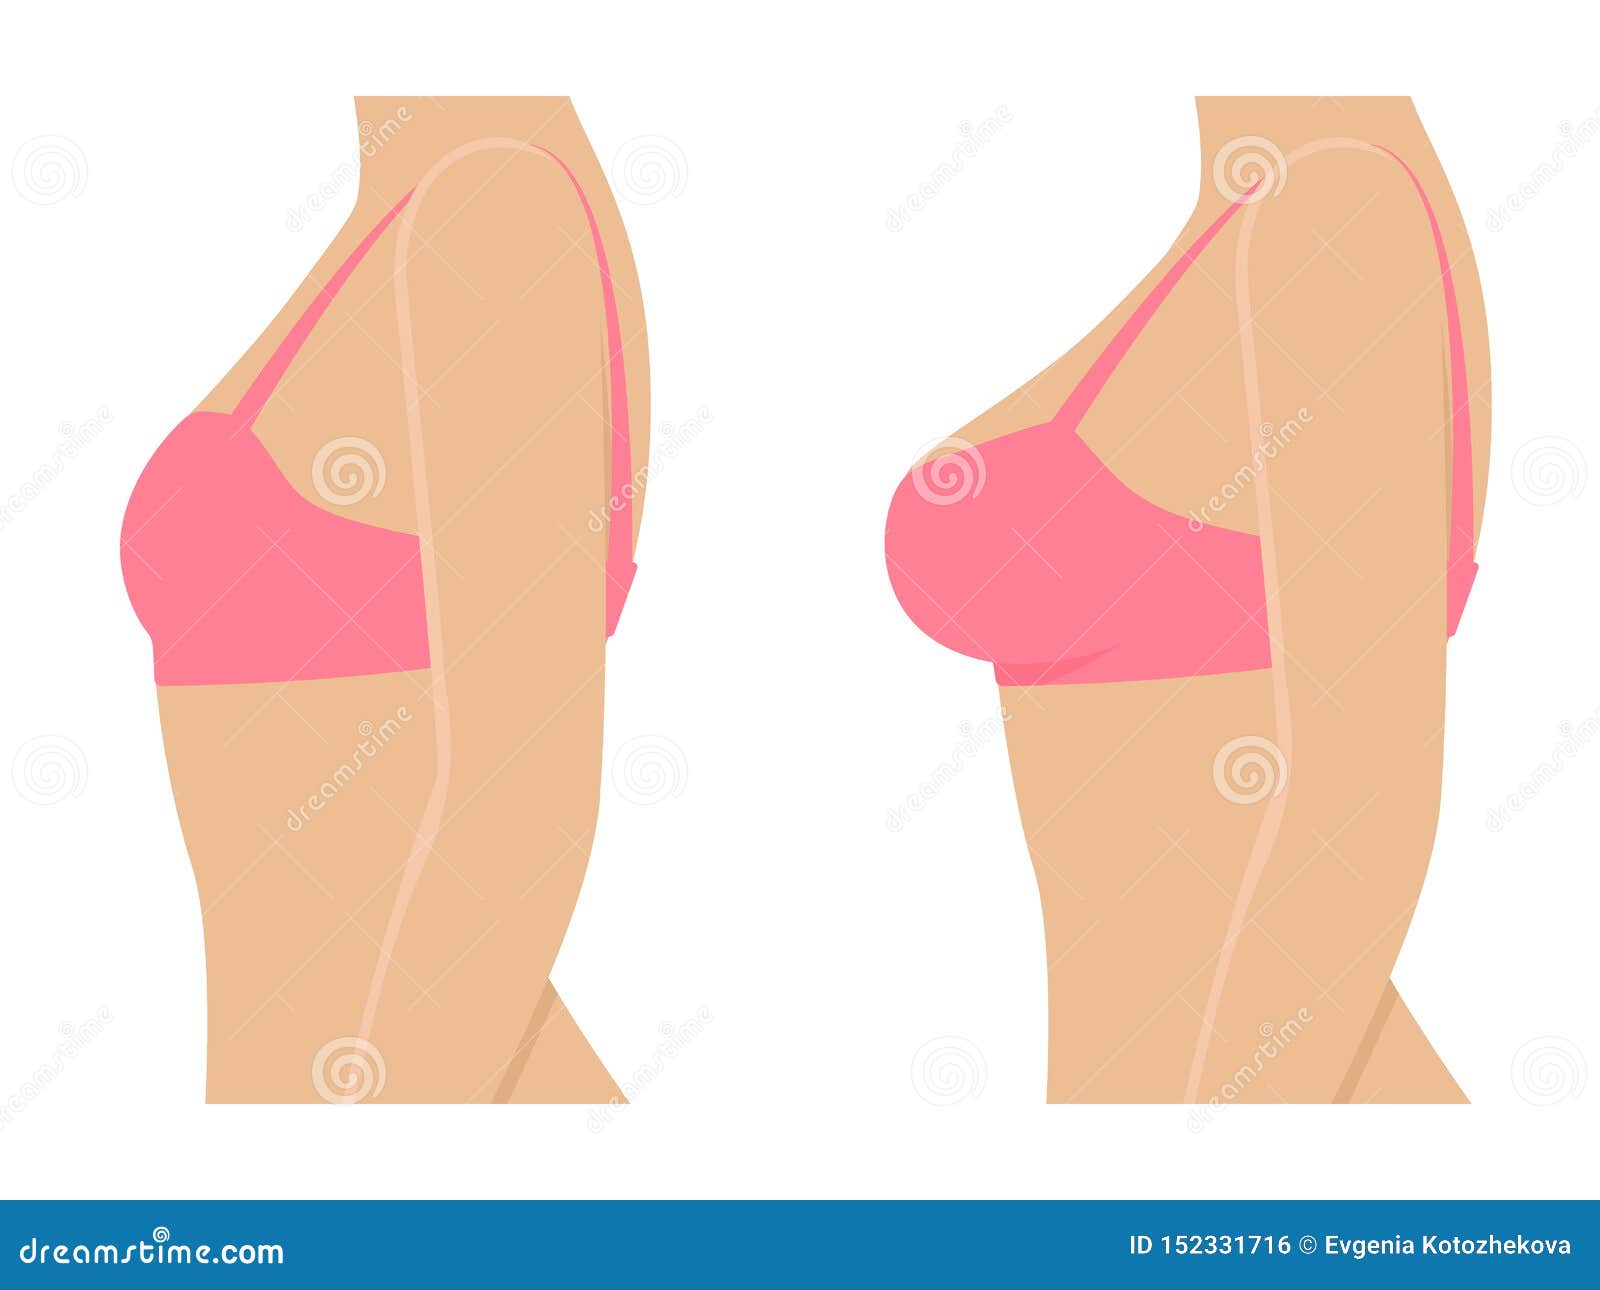 Breast Size Bust Enlargement Implant Plastic Surgery Stock Vector